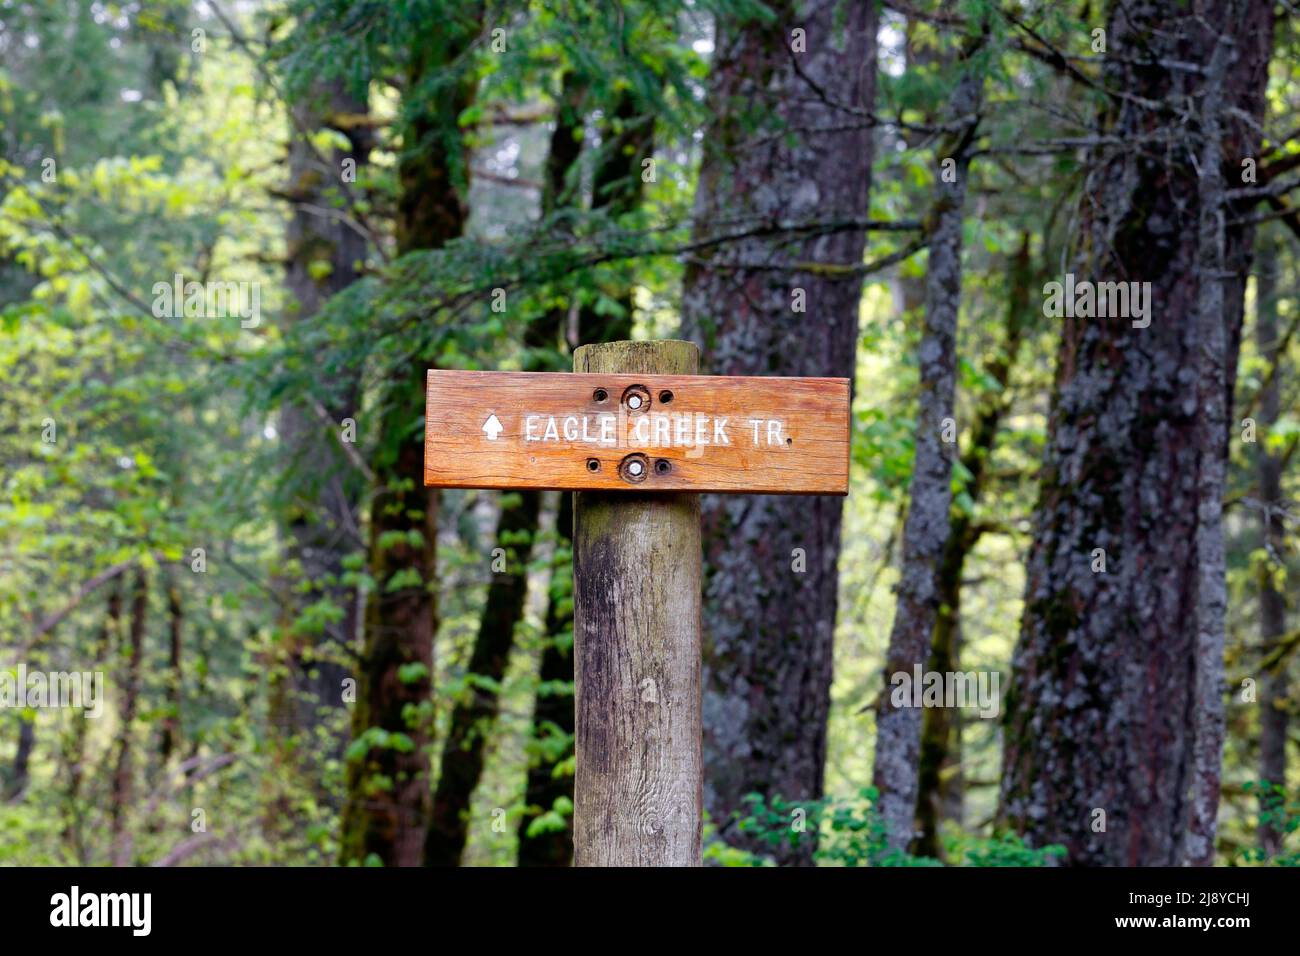 A wooden sign pointing to Eagle Creek Trail in the Columbia River Gorge National Scenic Area, Oregon. Stock Photo